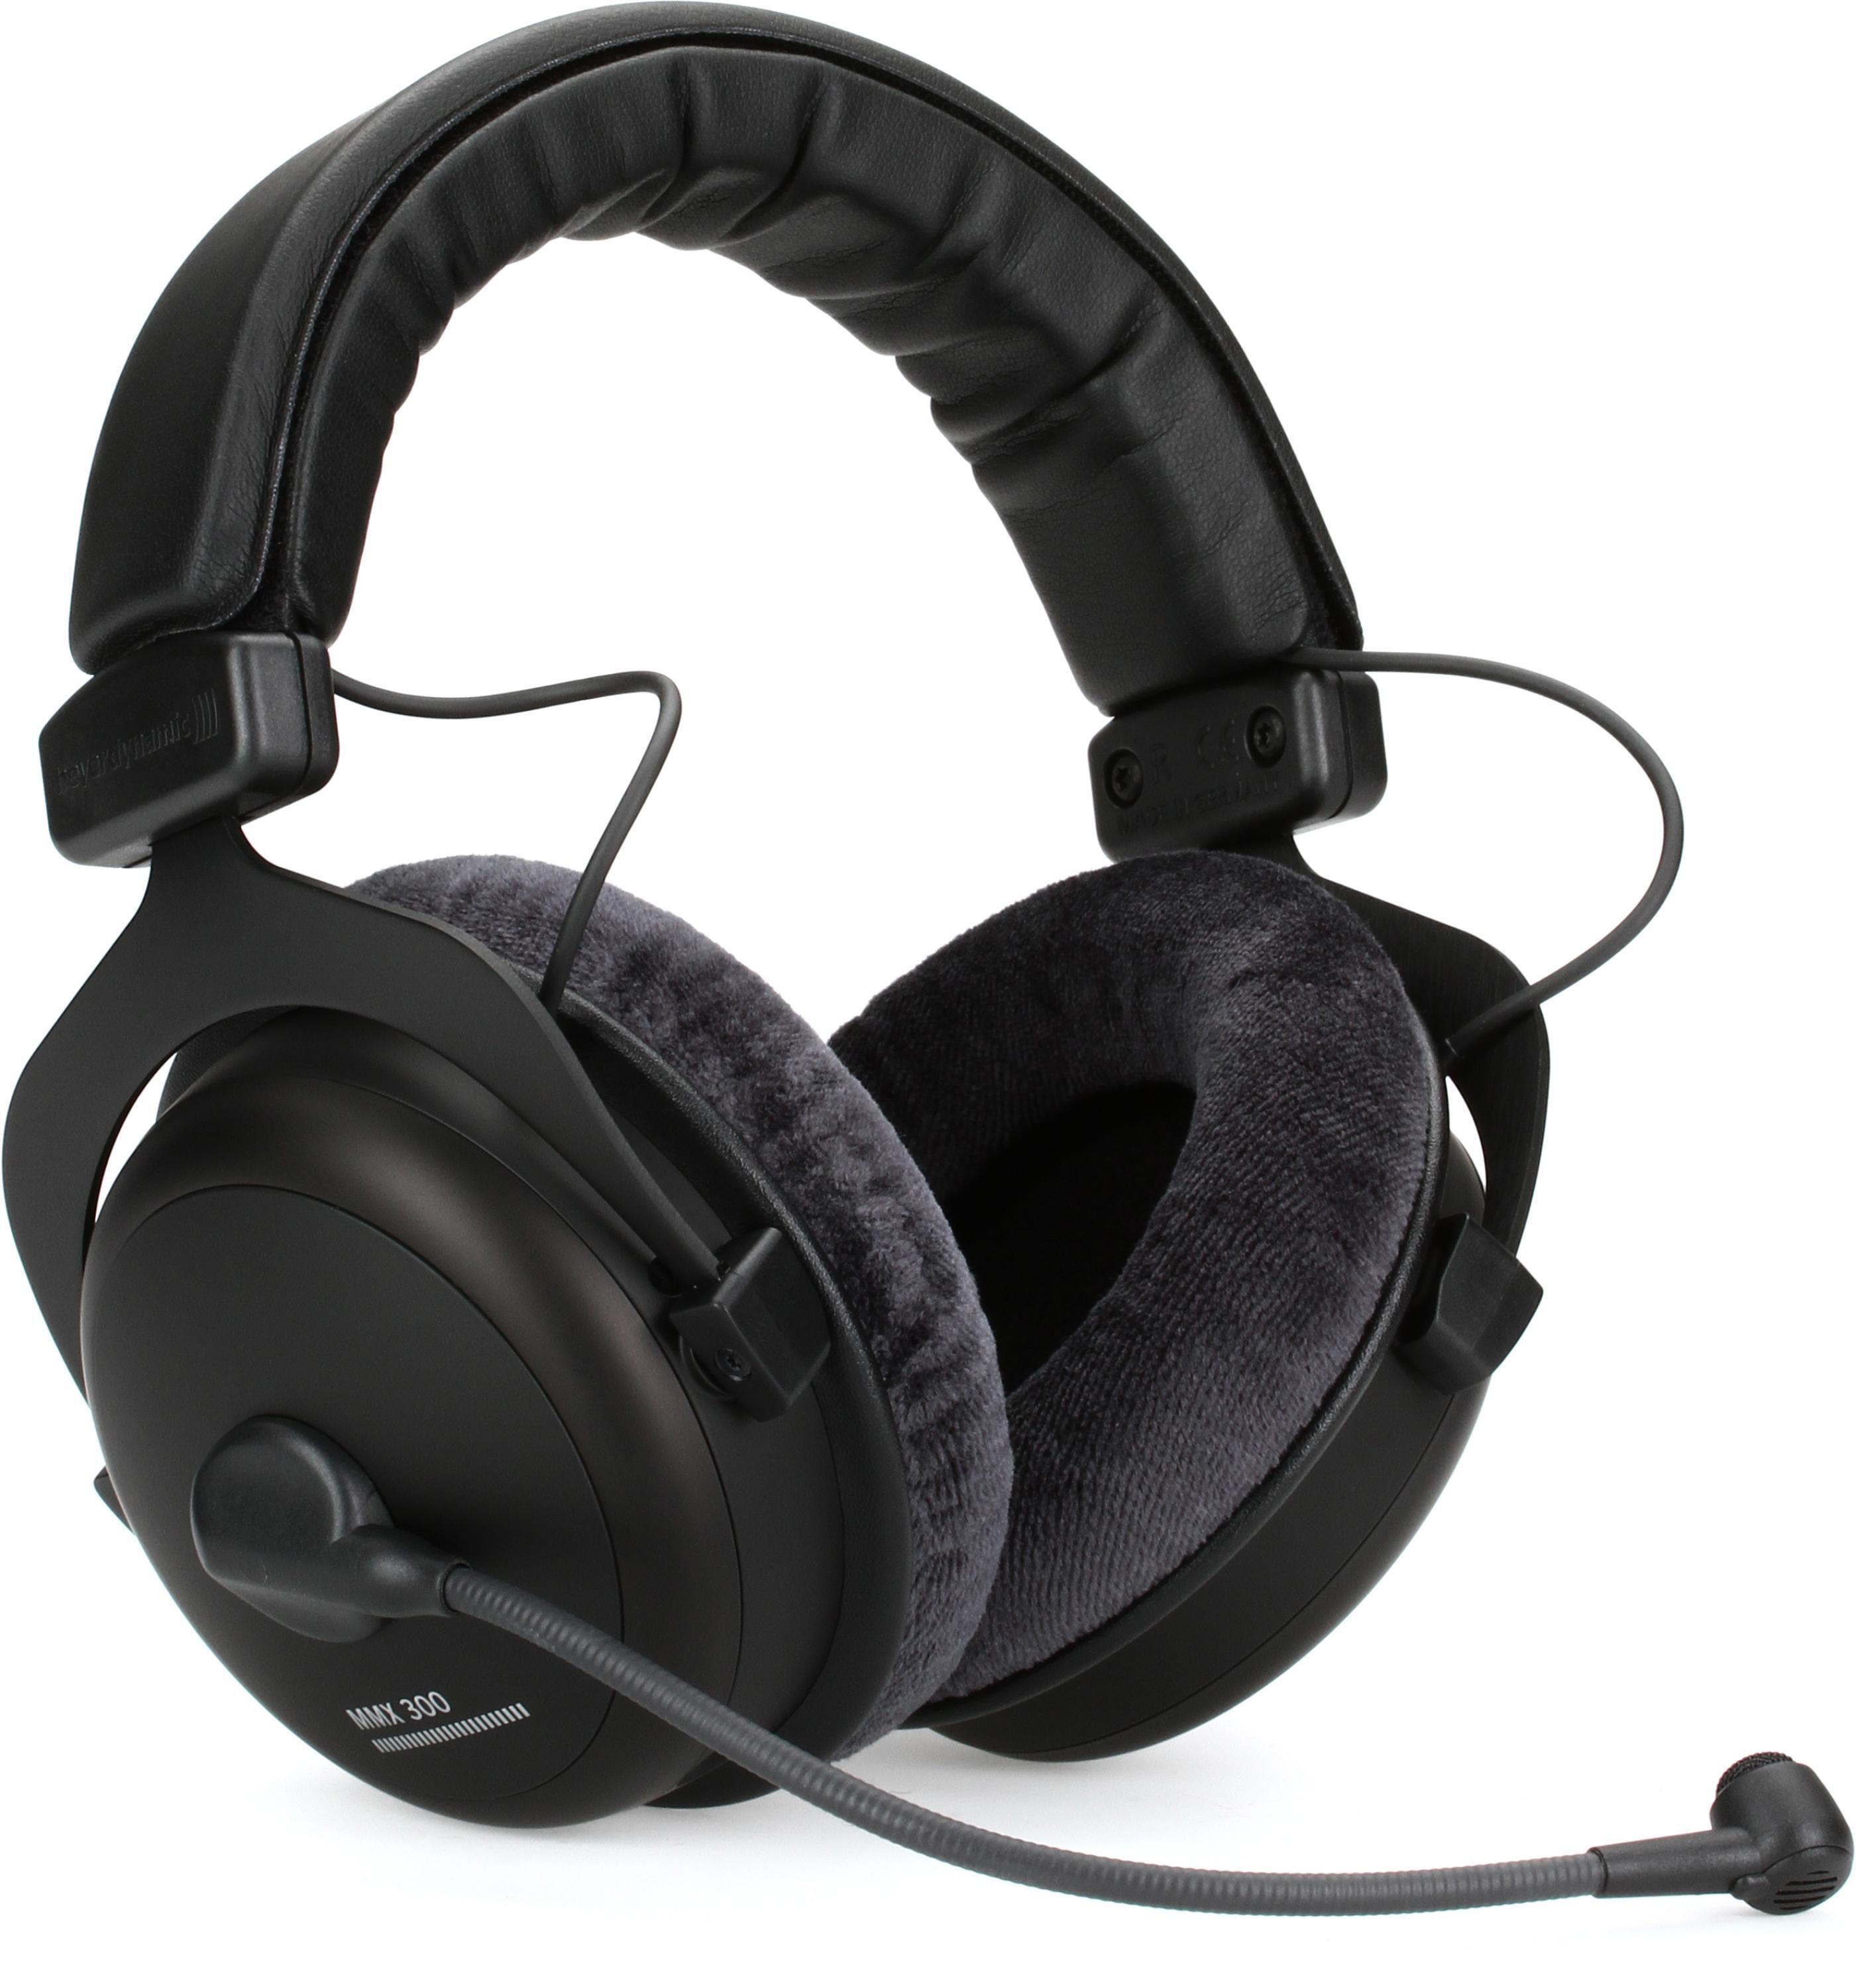 Beyerdynamic releases its first-ever wireless gaming headset